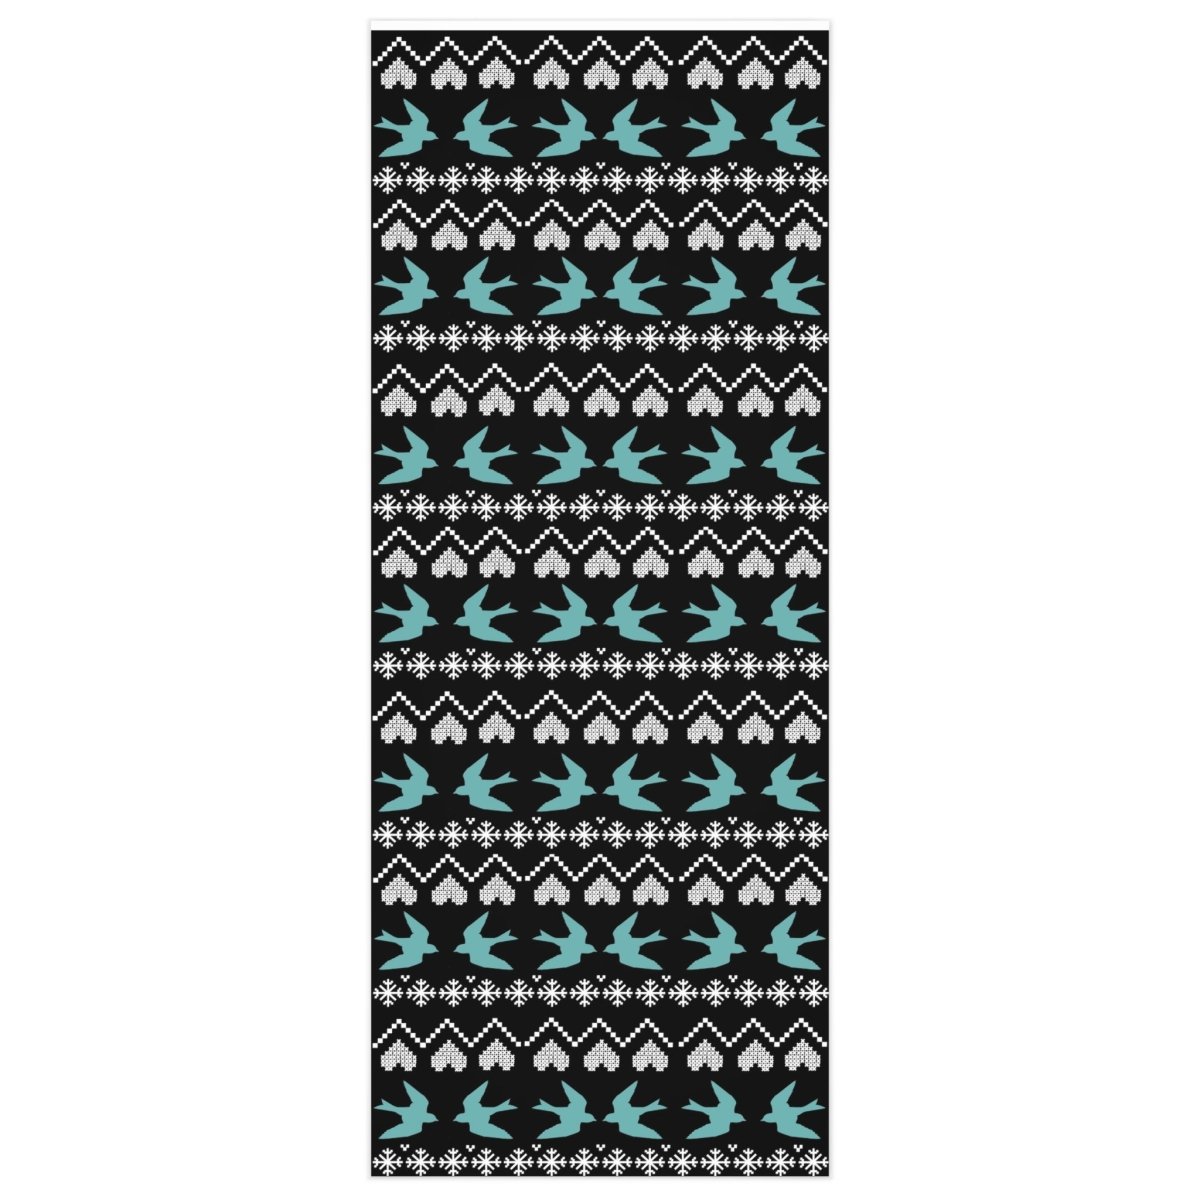 Too Fast | Tattoo Bird Gift Wrapping Paper